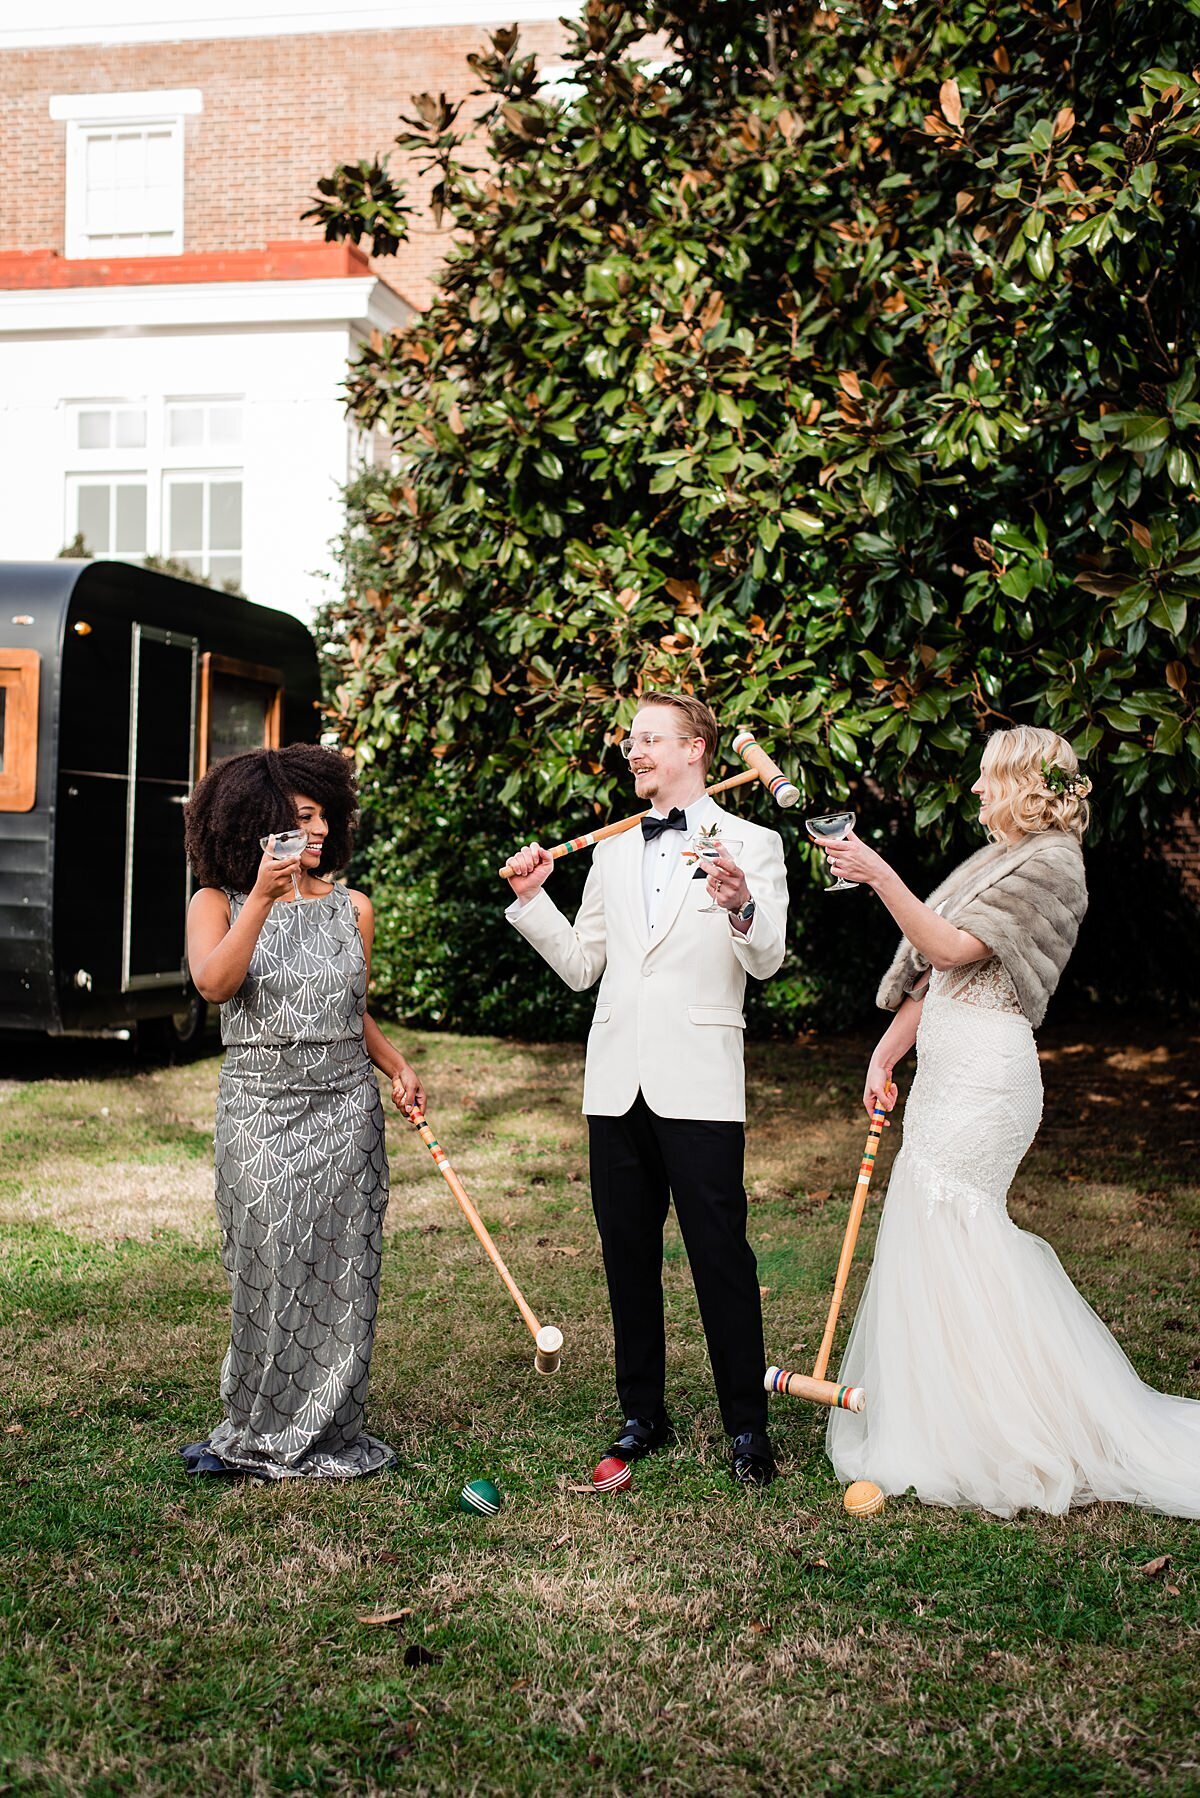 African American bridesmaid wearing a silver sheath dress plays croquet with the groom wearing a white jacket and black pants and the 1920s bride wearing a long white lace dress and fur wrap while drinking champagne